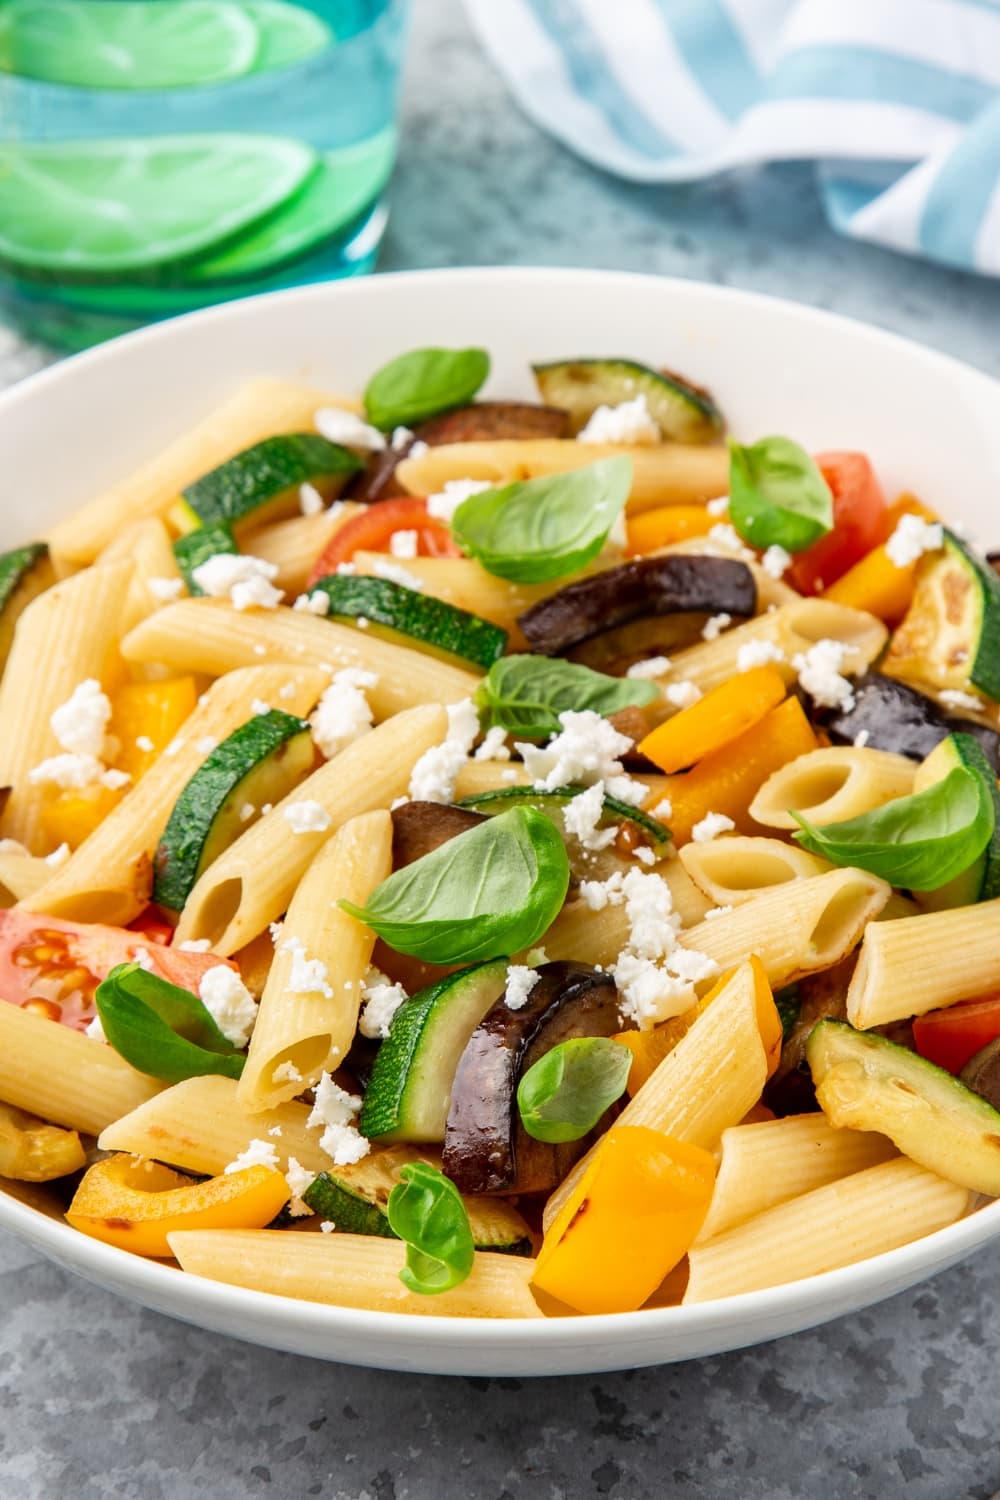 Pasta Salad with Grilled Eggplant, Zucchini and Tomatoes, Garnished With Cottage Cheese and Fresh Basil Leaves